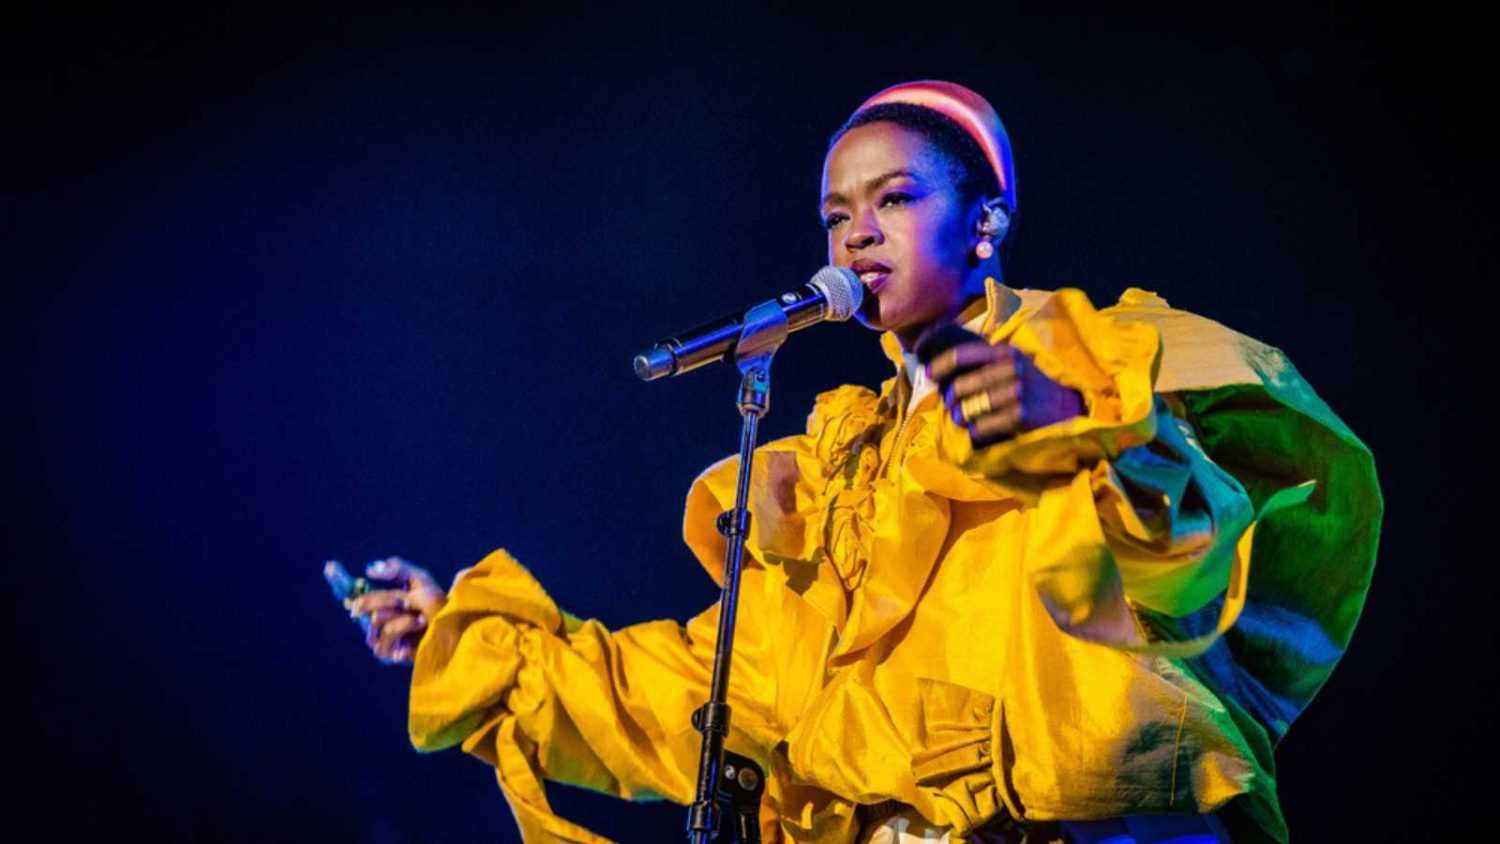 12-14 July 2019. North Sea Jazz Festival, Ahoy Rotterdam, The Netherlands. Concert of Lauryn Hill